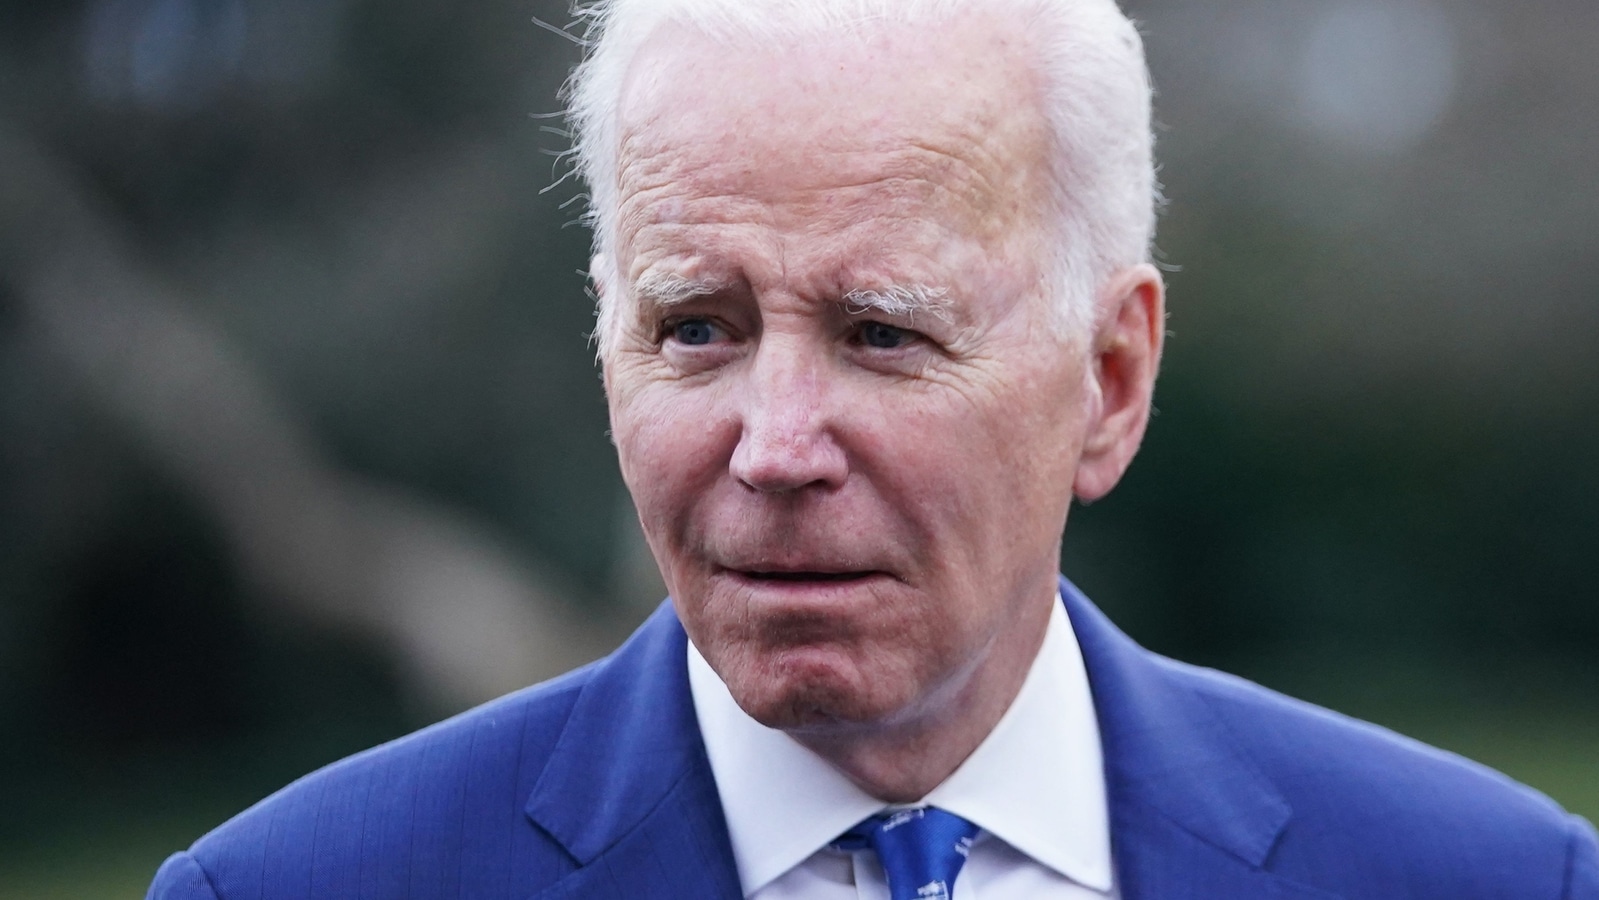 Joe Biden FBI search, classified documents and his son: What we know so far